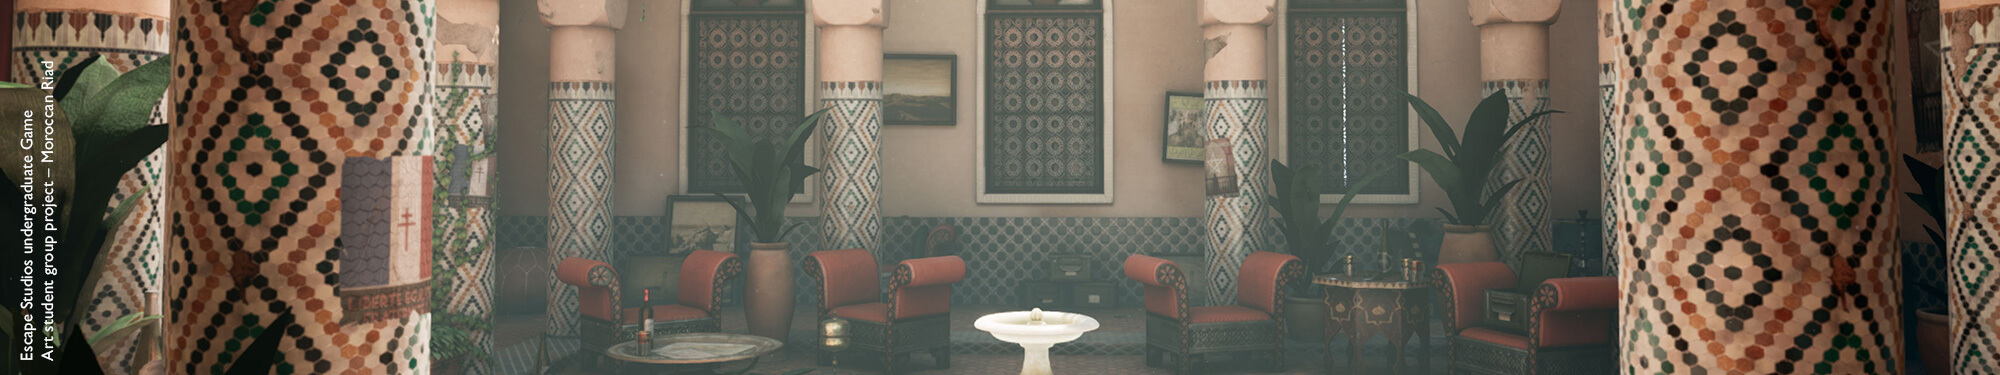 Game environment scene of a Moroccan riad